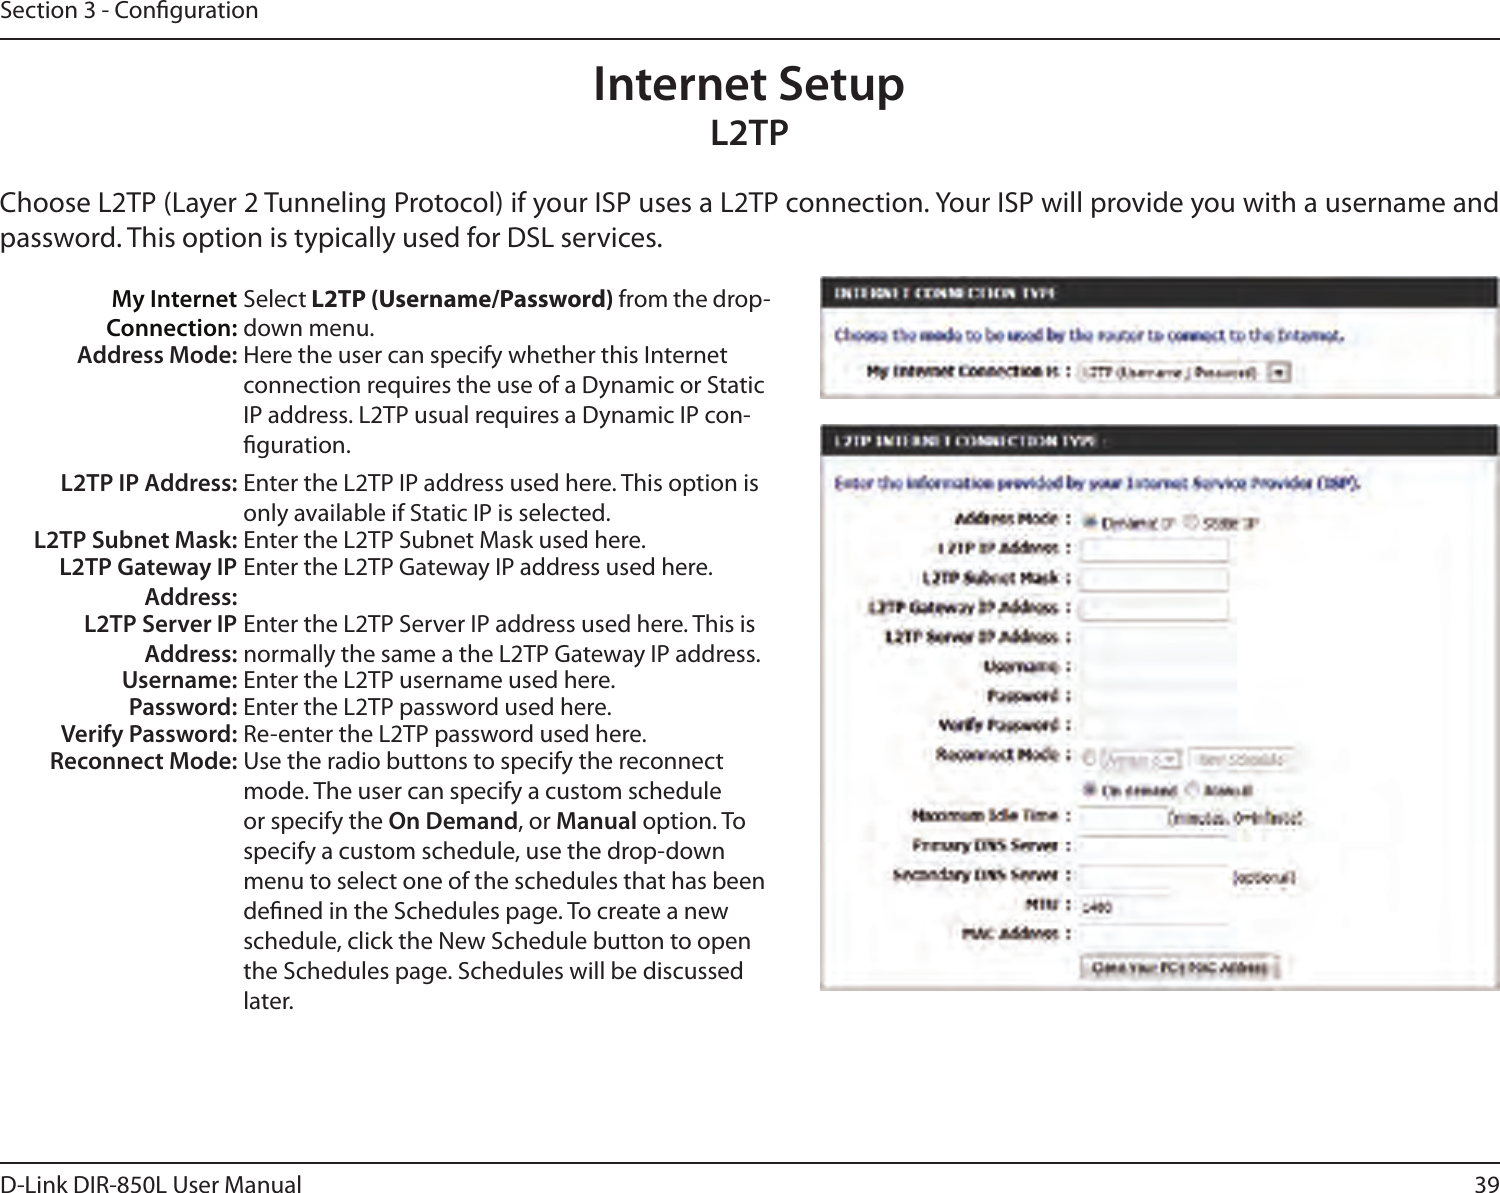 39D-Link DIR-850L User ManualSection 3 - CongurationInternet SetupL2TPChoose L2TP (Layer 2 Tunneling Protocol) if your ISP uses a L2TP connection. Your ISP will provide you with a username and password. This option is typically used for DSL services. My Internet Connection:Select L2TP (Username/Password) from the drop-down menu.Address Mode: Here the user can specify whether this Internet connection requires the use of a Dynamic or Static IP address. L2TP usual requires a Dynamic IP con-guration.L2TP IP Address: Enter the L2TP IP address used here. This option is only available if Static IP is selected.L2TP Subnet Mask: Enter the L2TP Subnet Mask used here.L2TP Gateway IP Address:Enter the L2TP Gateway IP address used here.L2TP Server IP Address:Enter the L2TP Server IP address used here. This is normally the same a the L2TP Gateway IP address.Username: Enter the L2TP username used here.Password: Enter the L2TP password used here.Verify Password: Re-enter the L2TP password used here.Reconnect Mode: Use the radio buttons to specify the reconnect mode. The user can specify a custom schedule or specify the On Demand, or Manual option. To specify a custom schedule, use the drop-down menu to select one of the schedules that has been dened in the Schedules page. To create a new schedule, click the New Schedule button to open the Schedules page. Schedules will be discussed later.